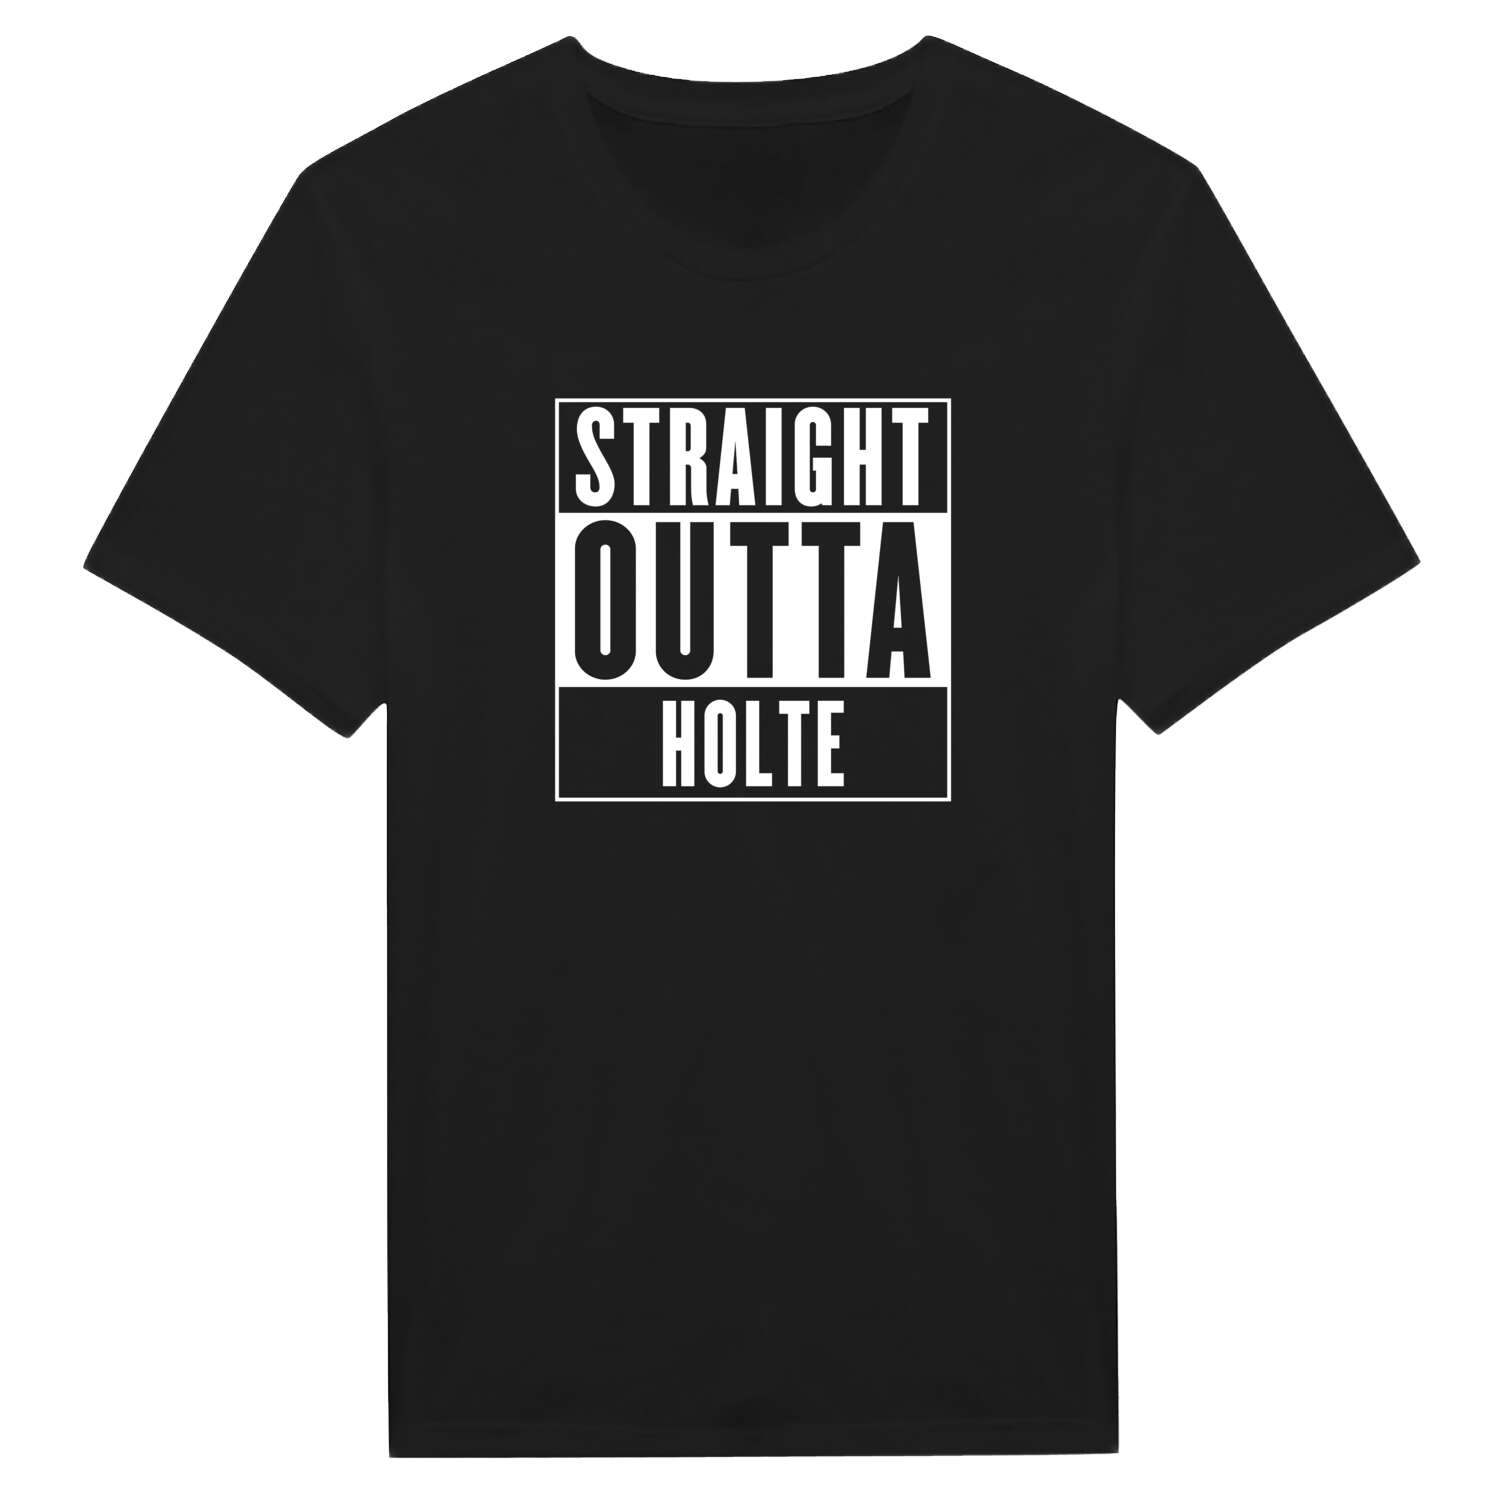 Holte T-Shirt »Straight Outta«